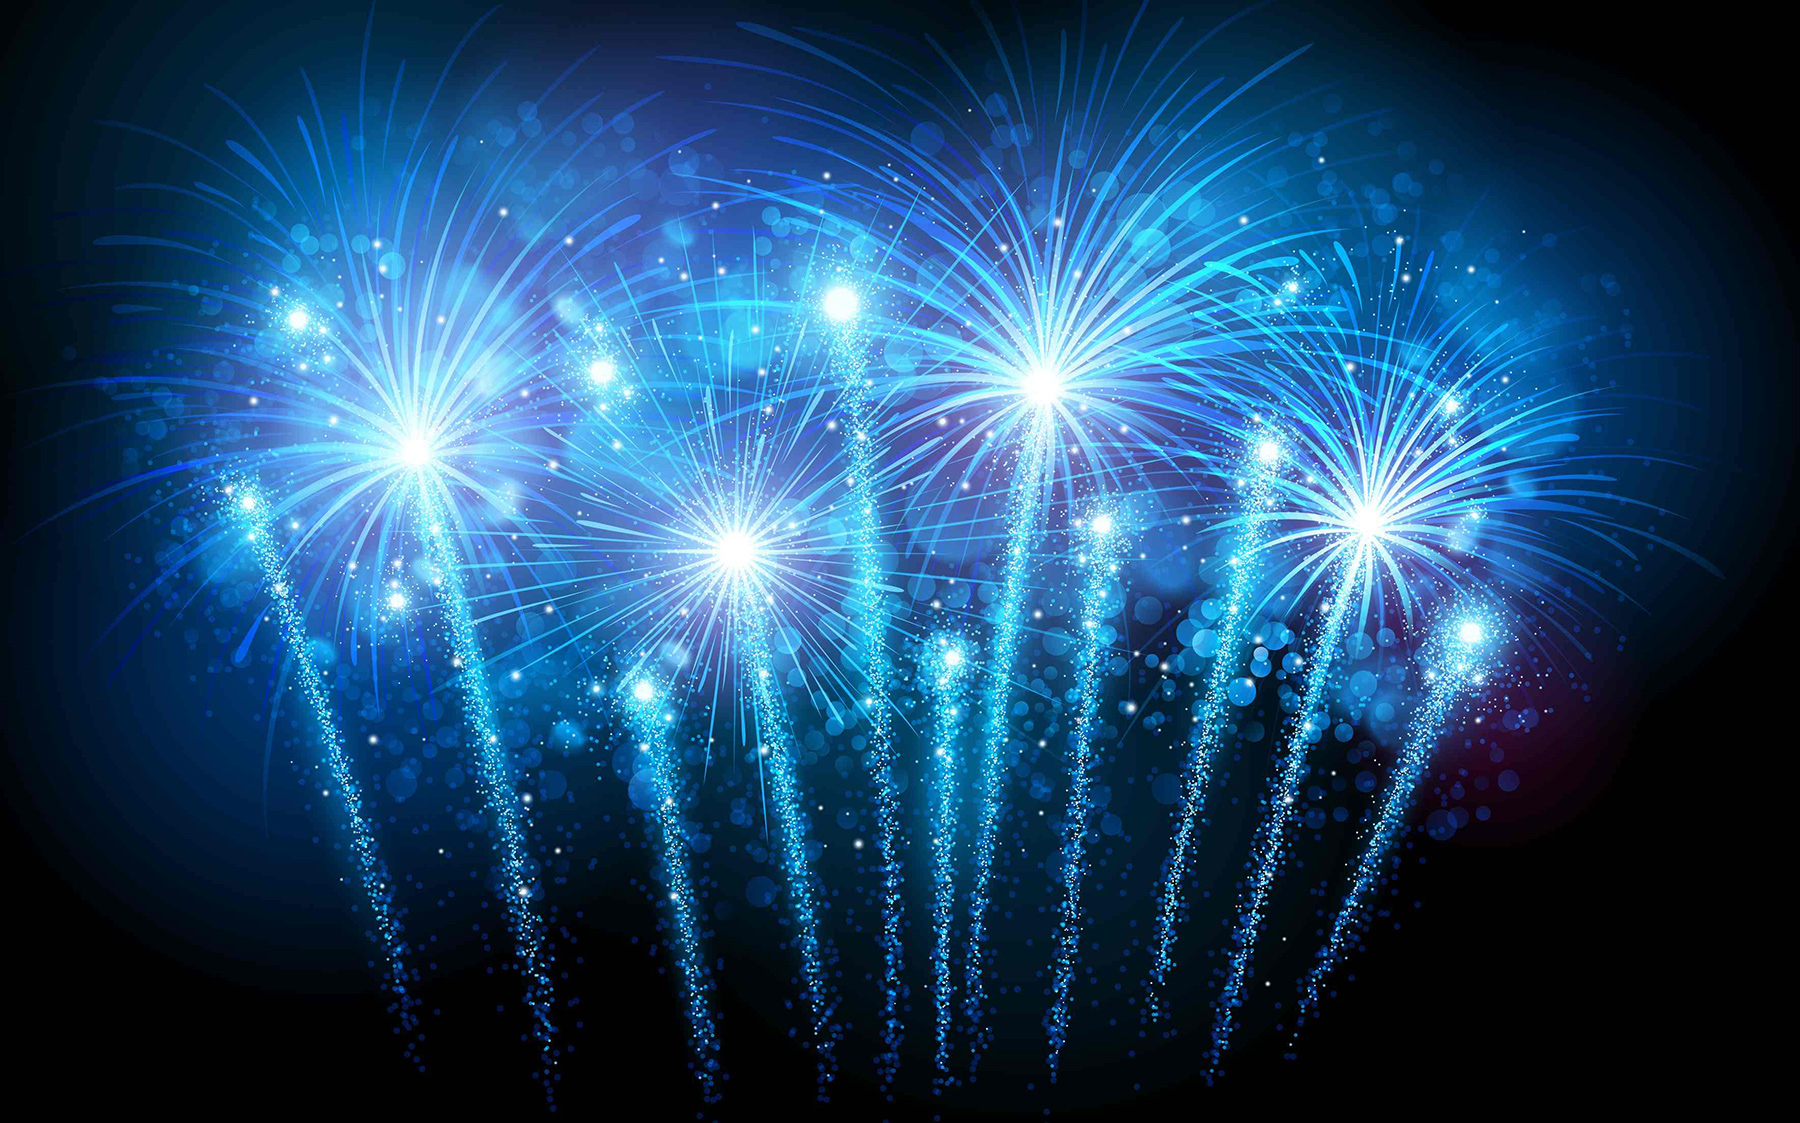 Fireworks Background Wallpaper Win10 Themes